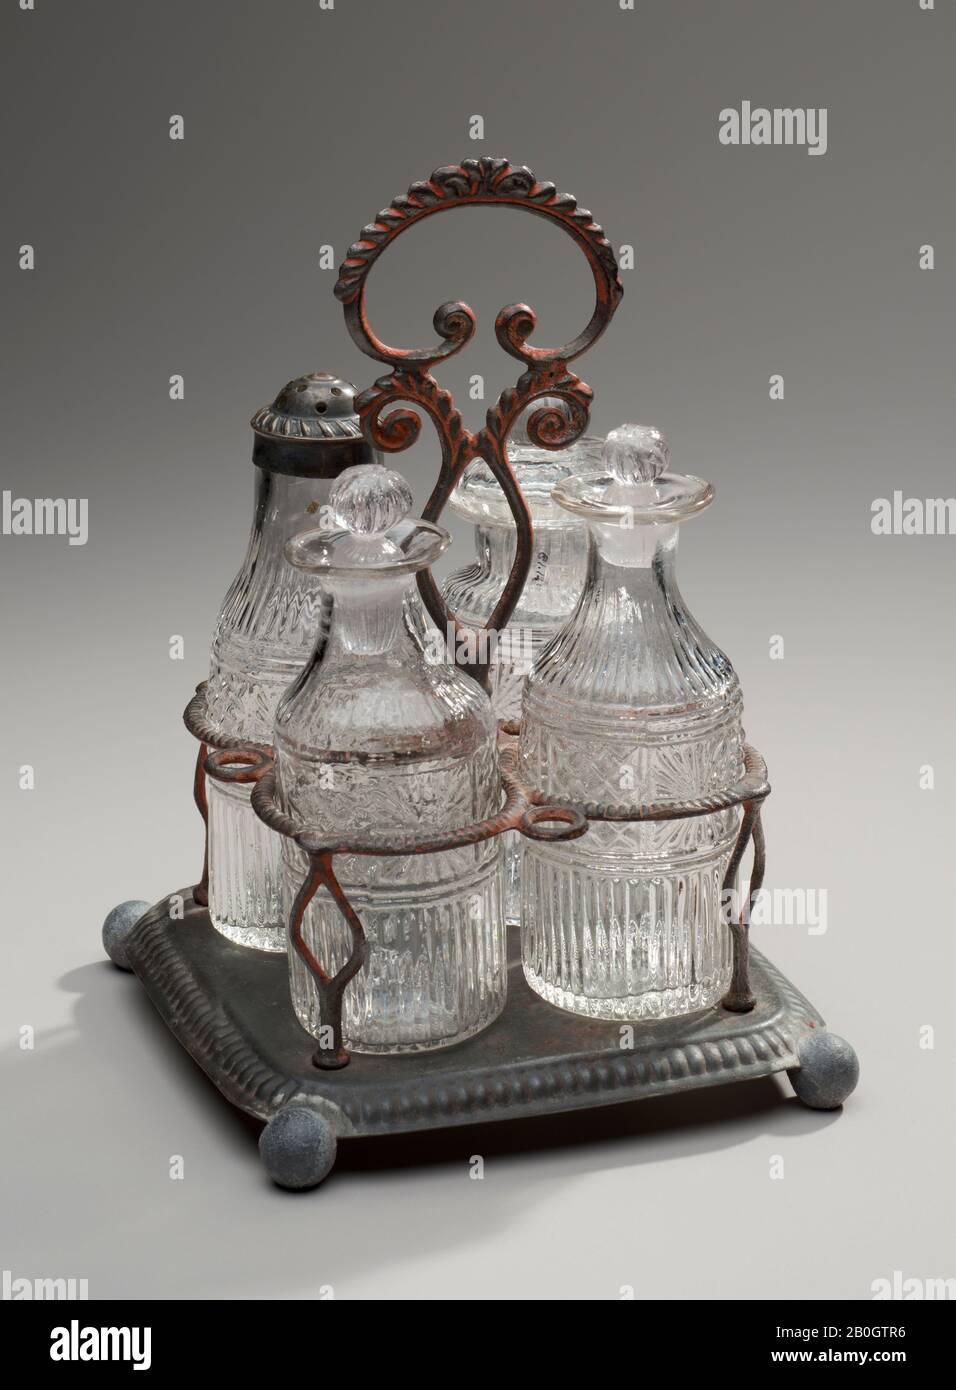 Maker unknown, Castor Set and Stand, c. 1820–40, Colorless lead glass, tin, and paint Stock Photo